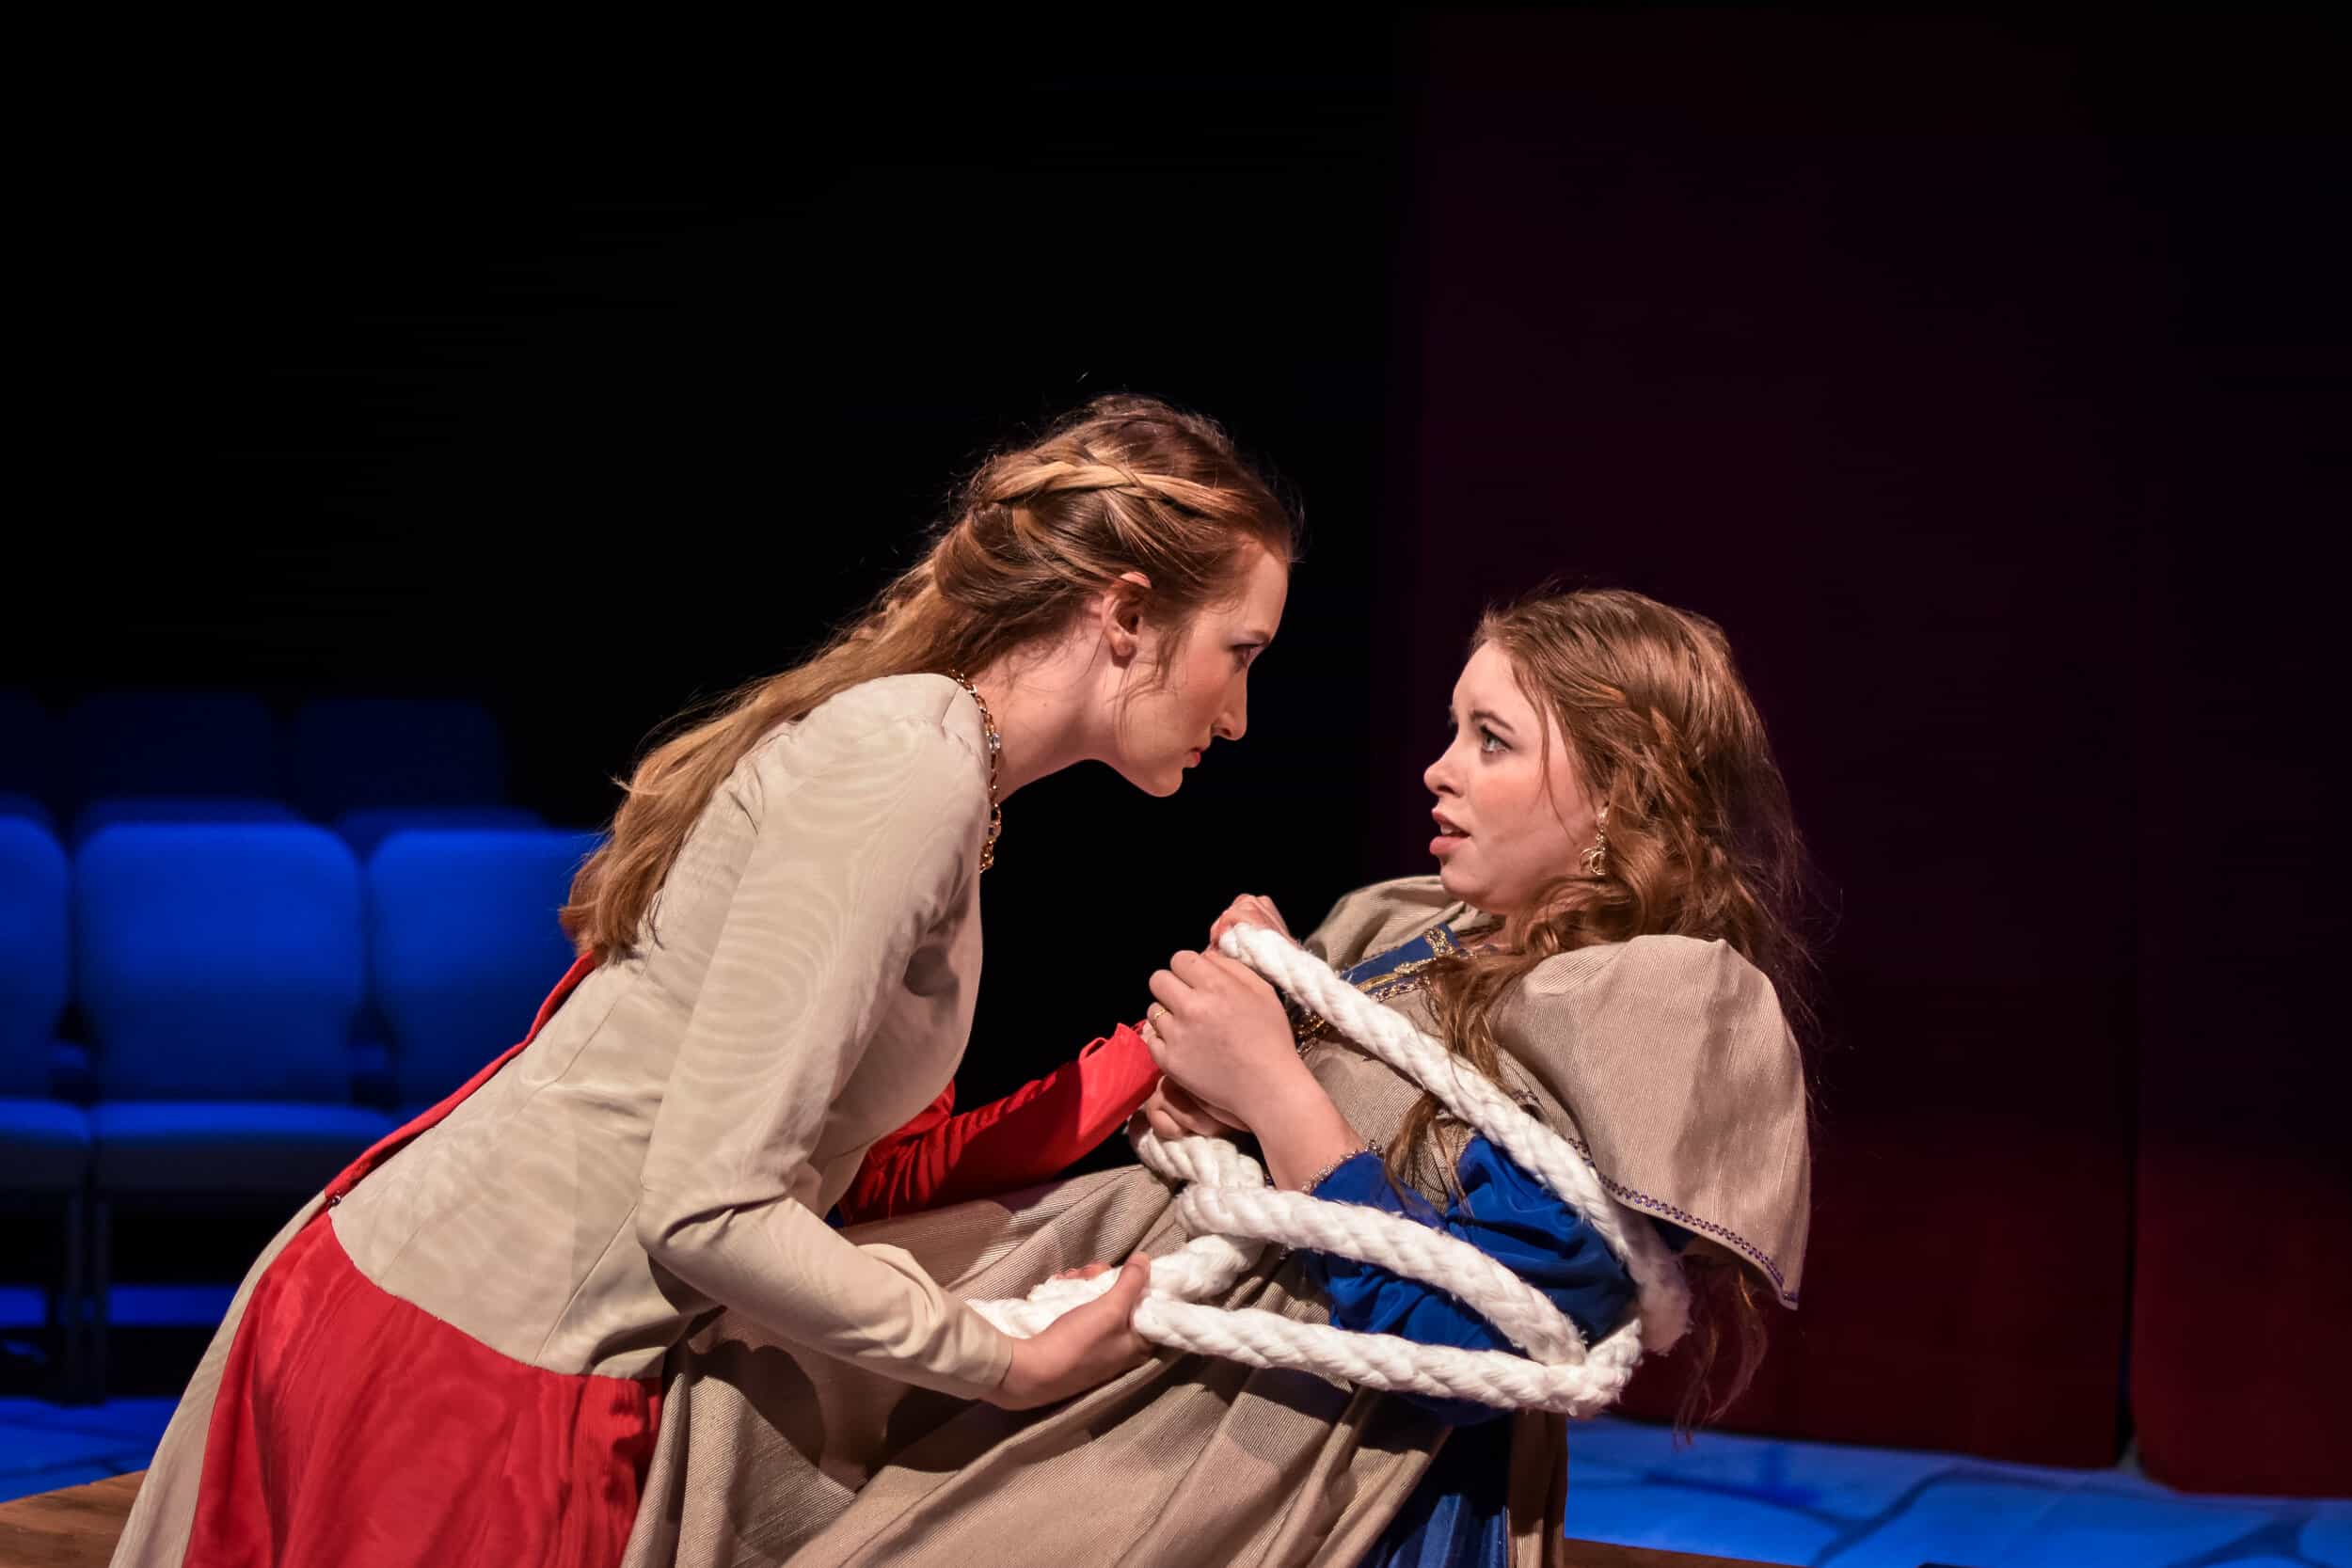 Kate torturing her sister, tying her hands, asking which suitor she likes best and teasing her about her dress. Taming of the Shrew - 2019